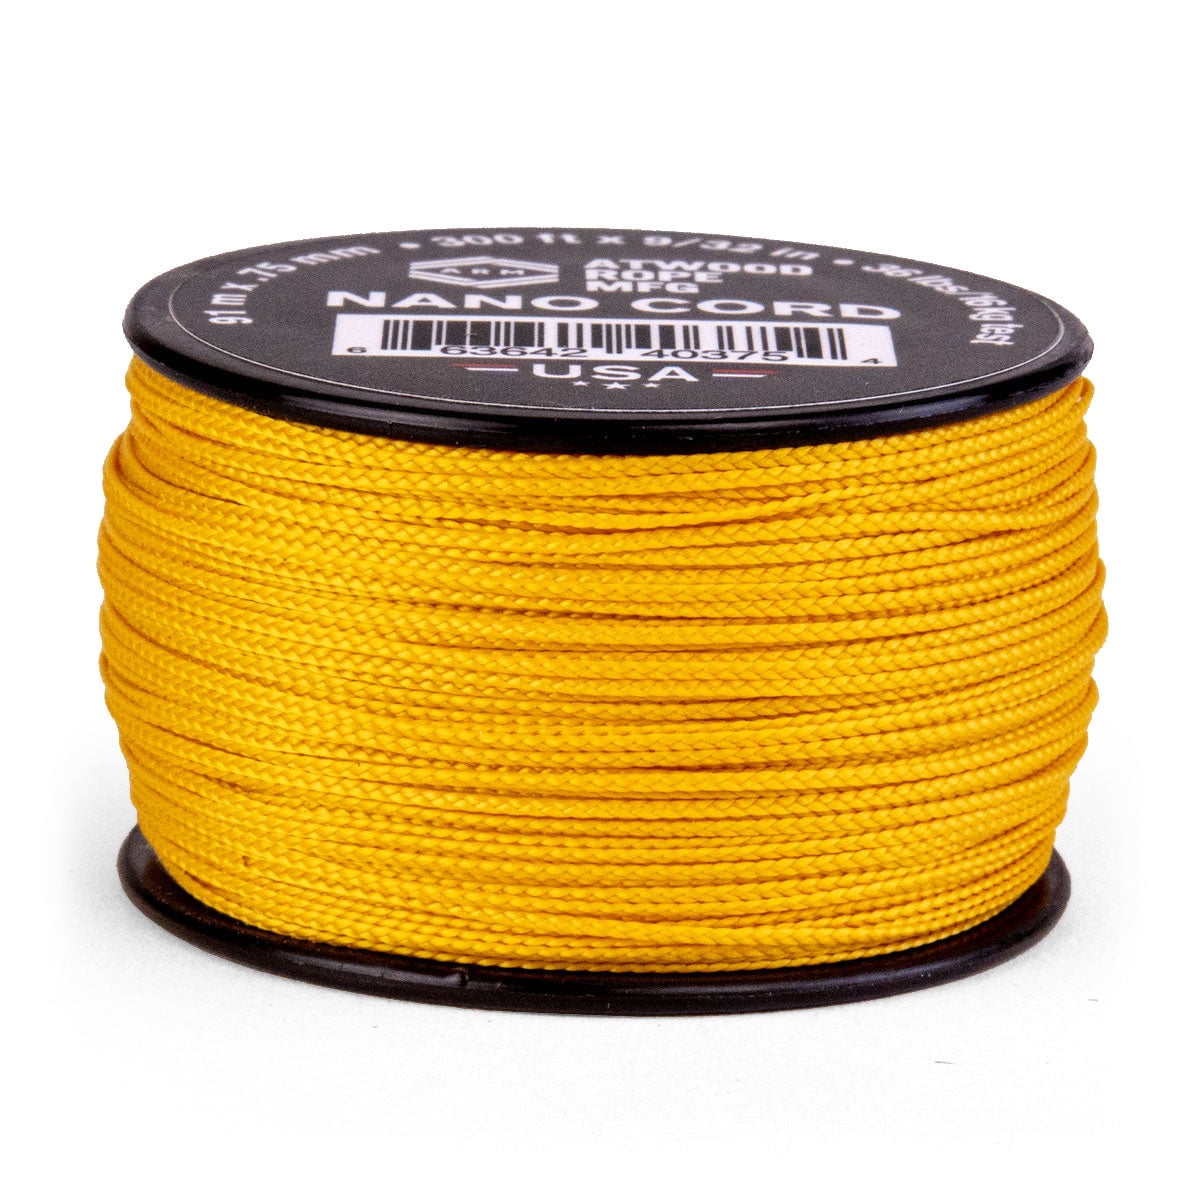 Atwood Rope MFG - .75mm Nano Cord - Air Force Gold - 300ft 